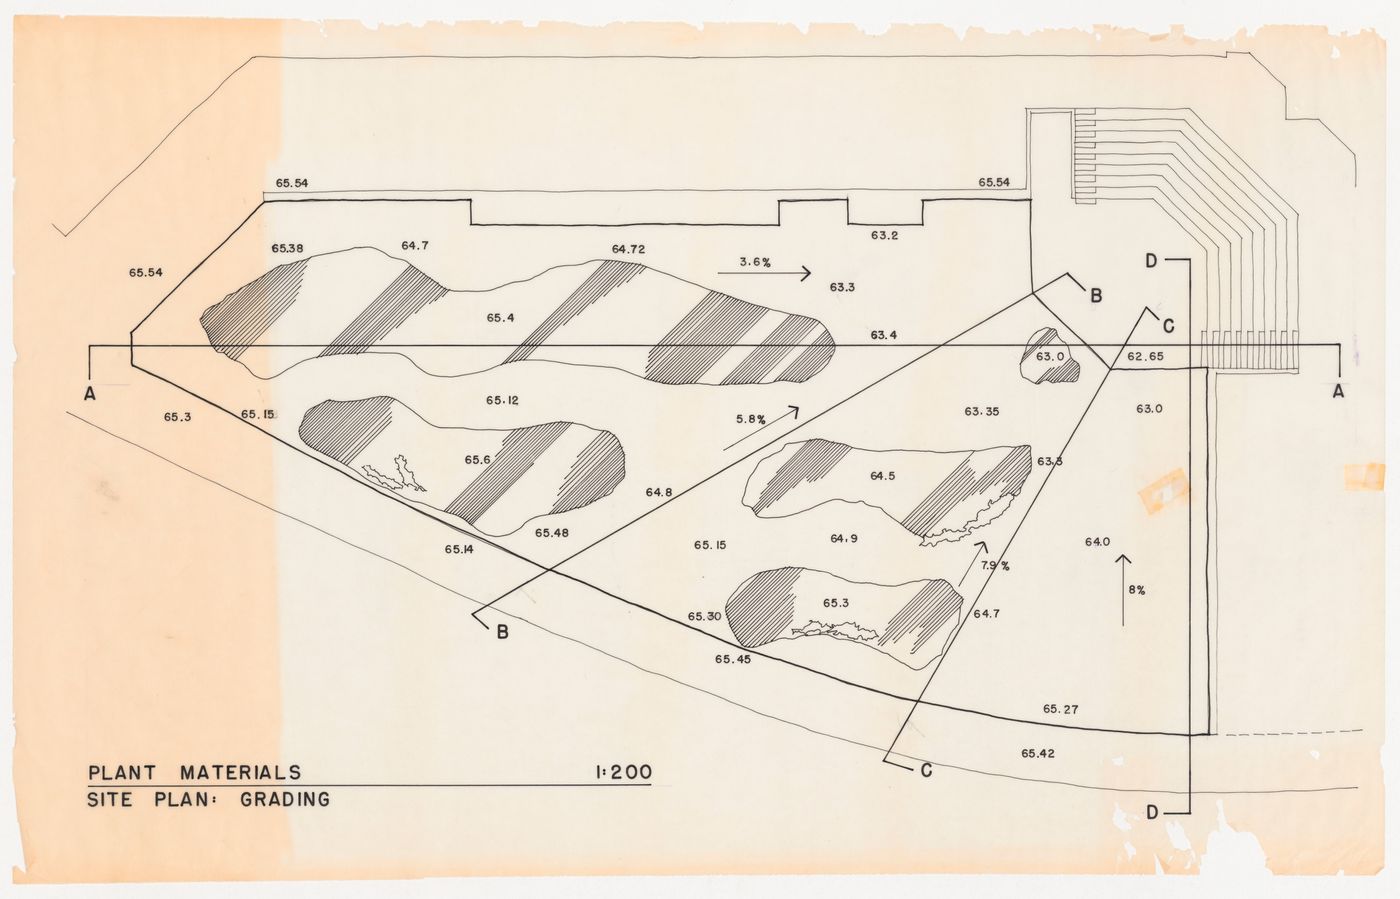 Site plan for plant materials showing grading for National Gallery of Canada, Ottawa, Ontario